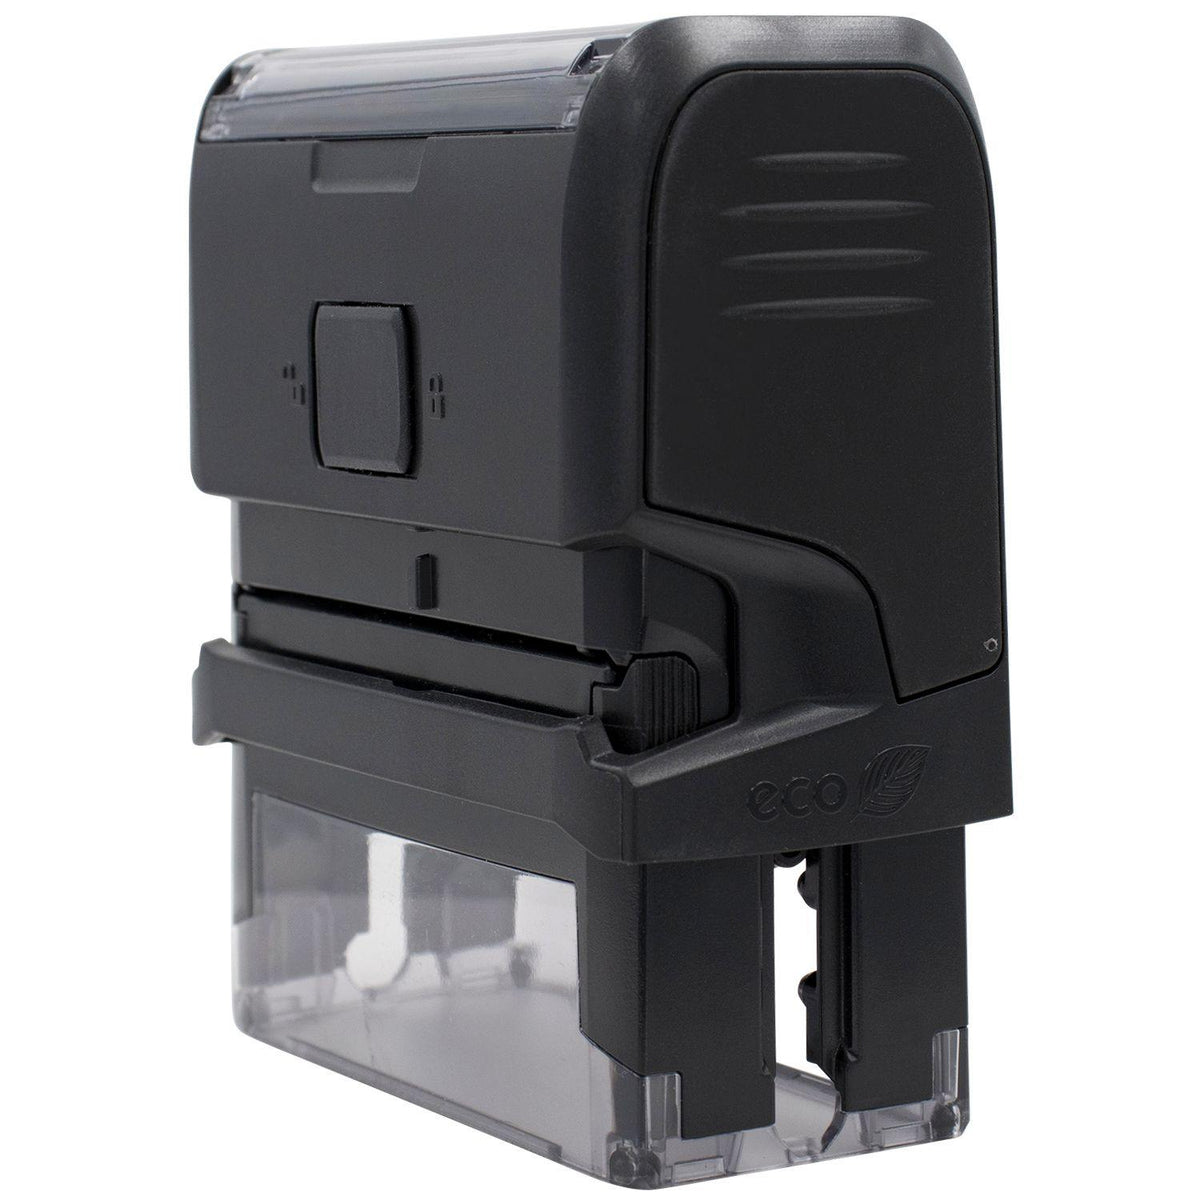 Large Self-Inking Perfect Stamp - Engineer Seal Stamps - Brand_Trodat, Impression Size_Large, Stamp Type_Self-Inking Stamp, Type of Use_Teacher